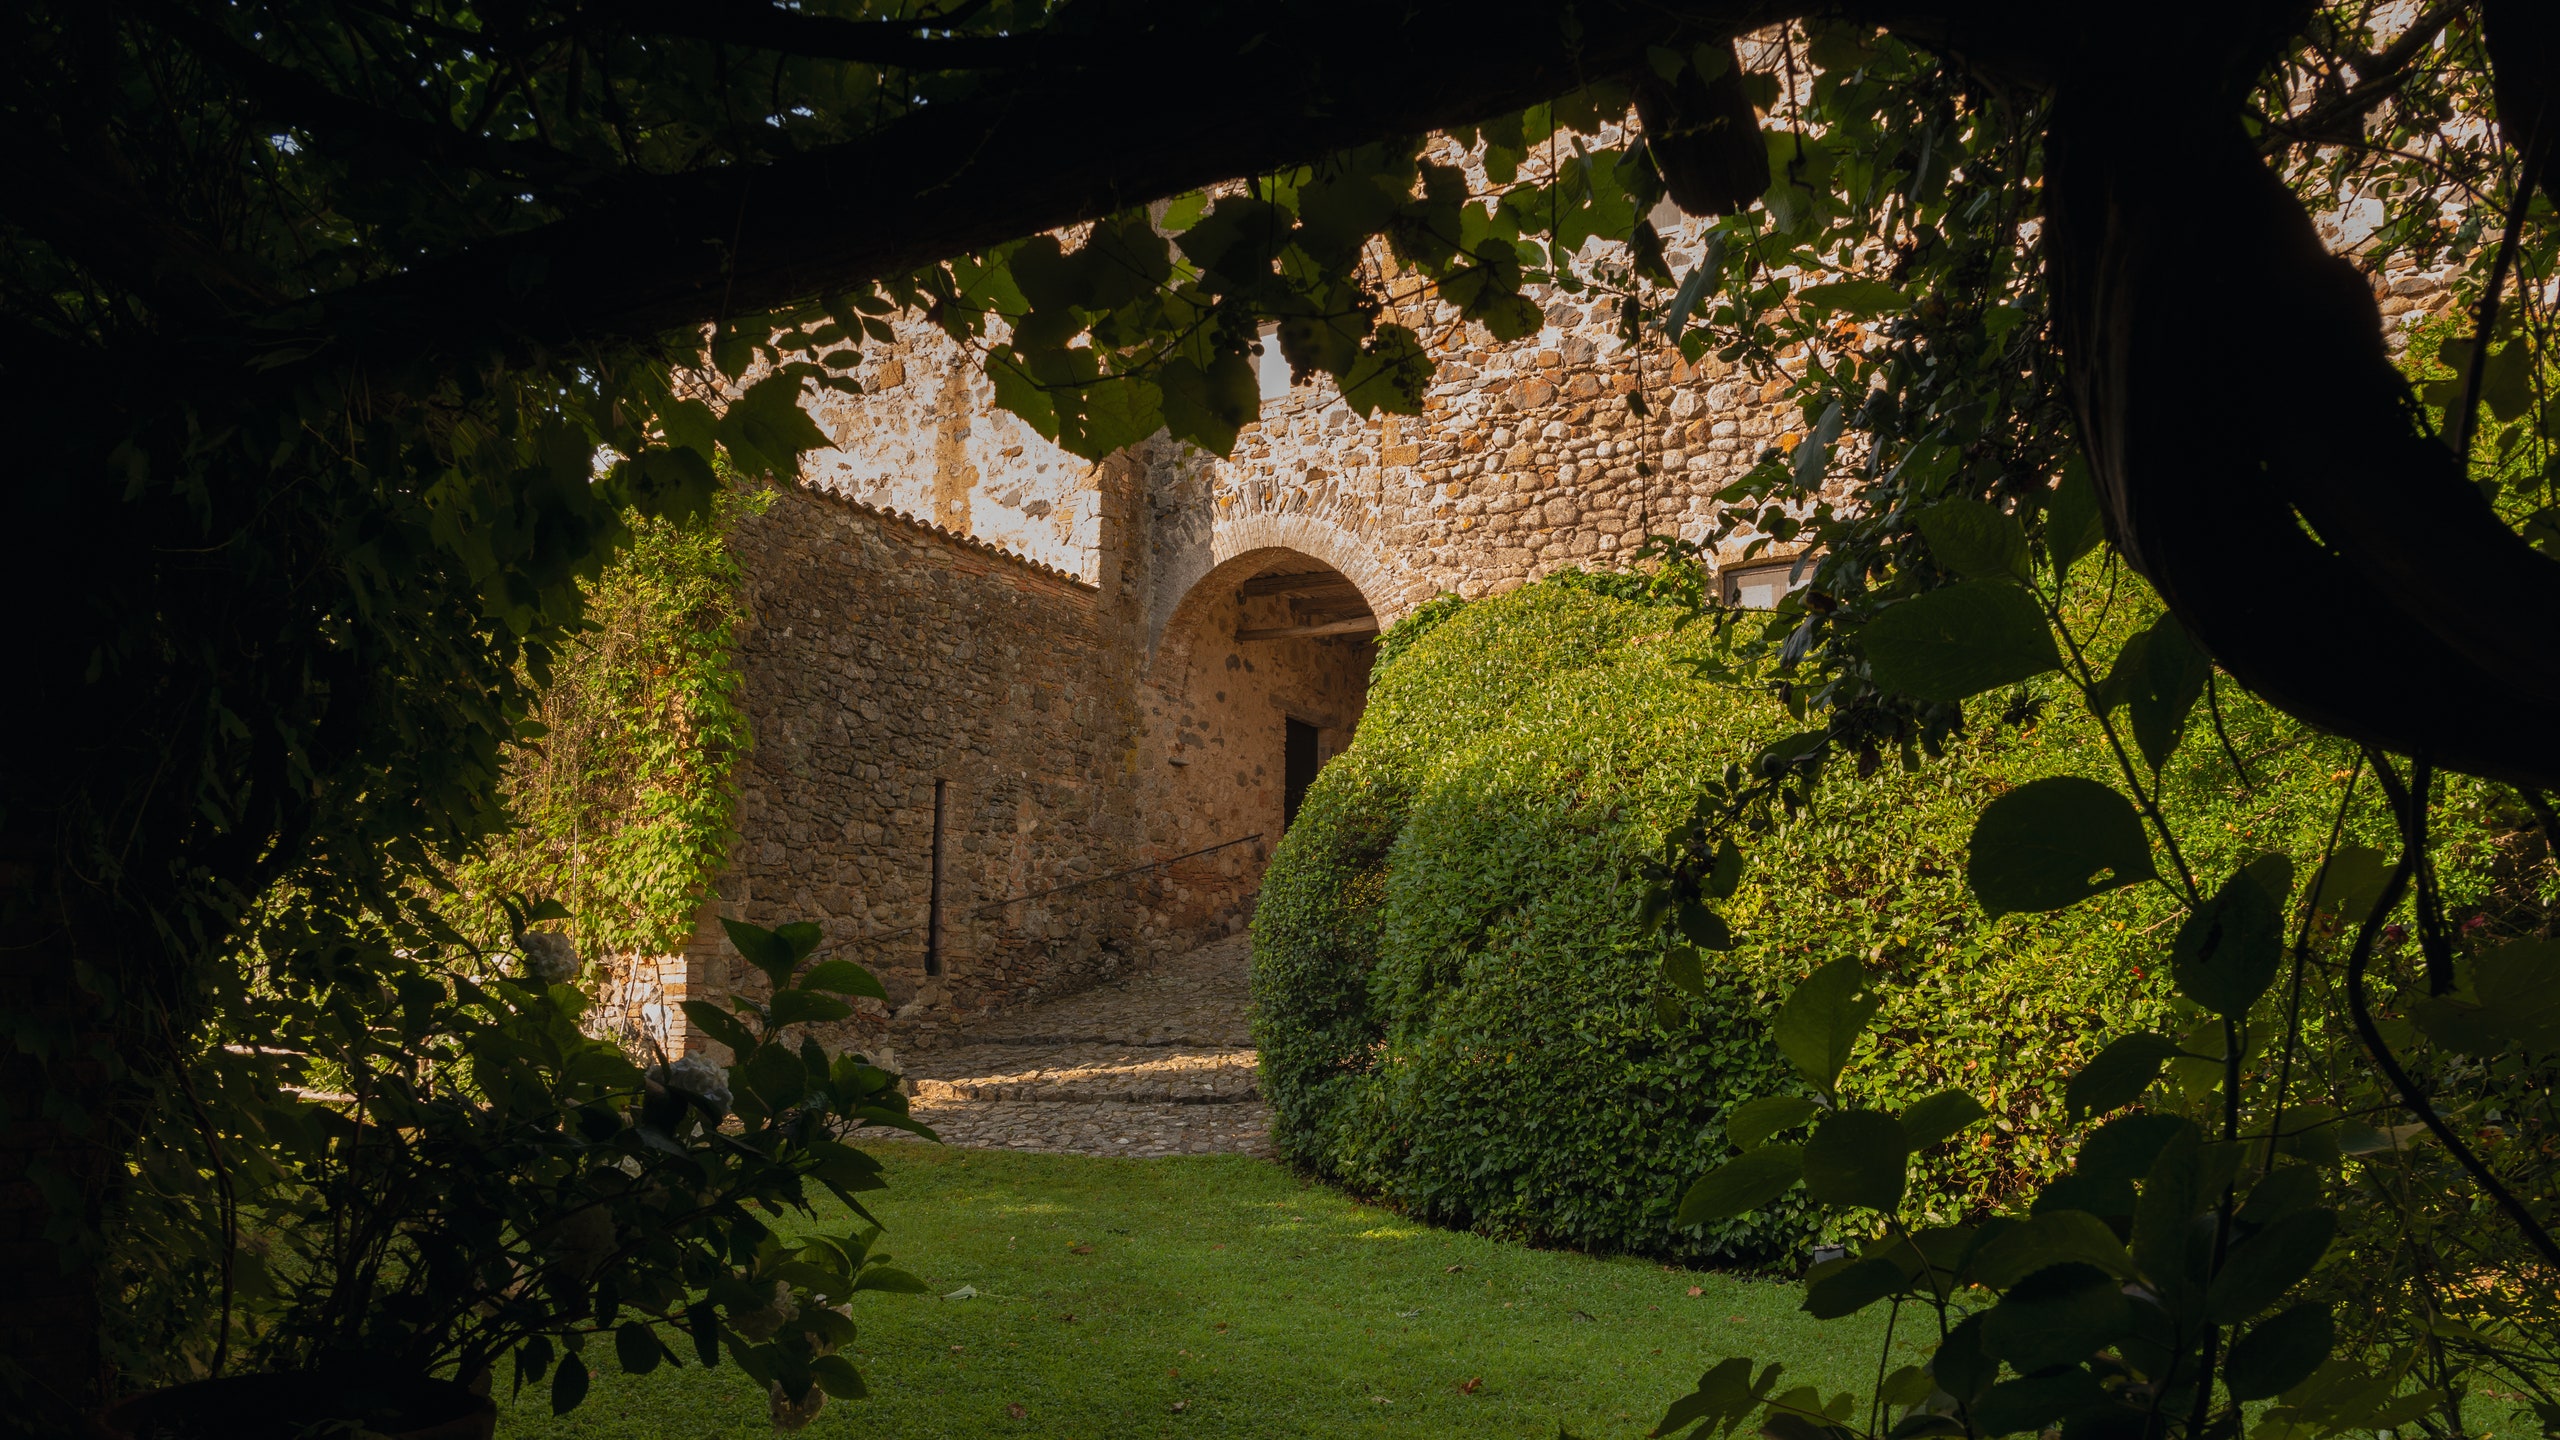 A view of the garden at La Torricella and an archway large enough for carriages to pass through